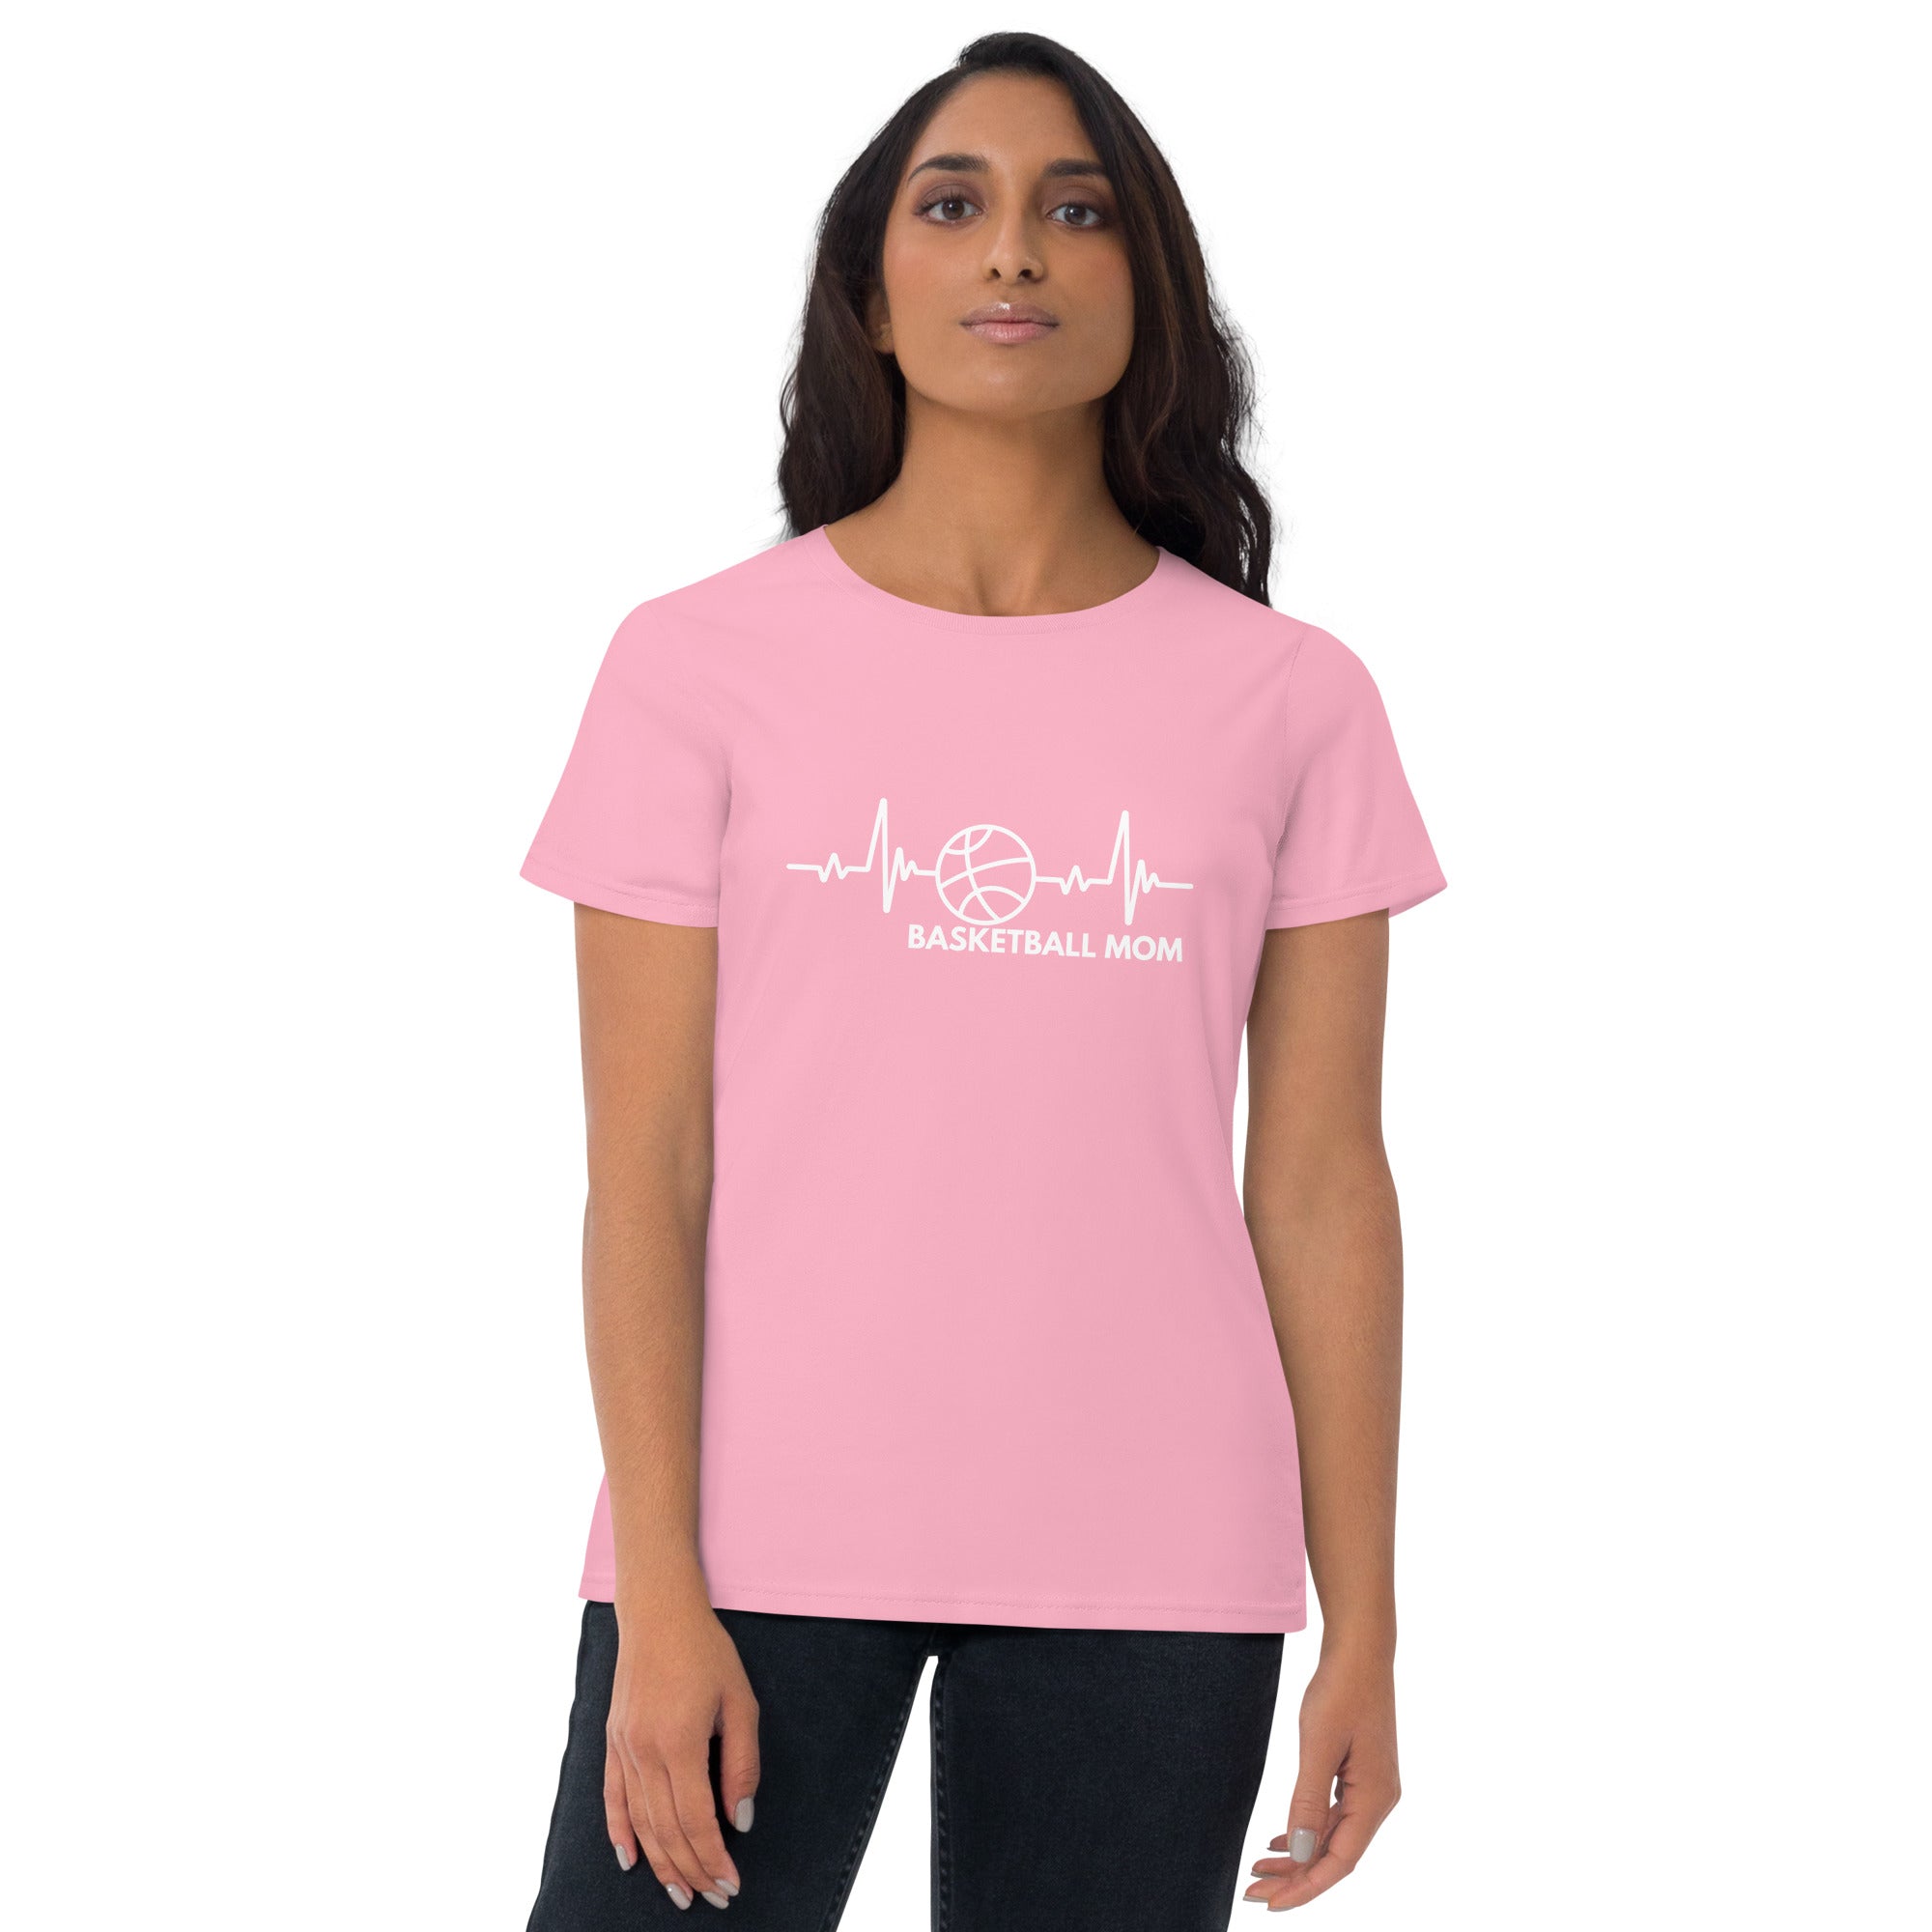 Basketball Mom Women's Fitted T-Shirt